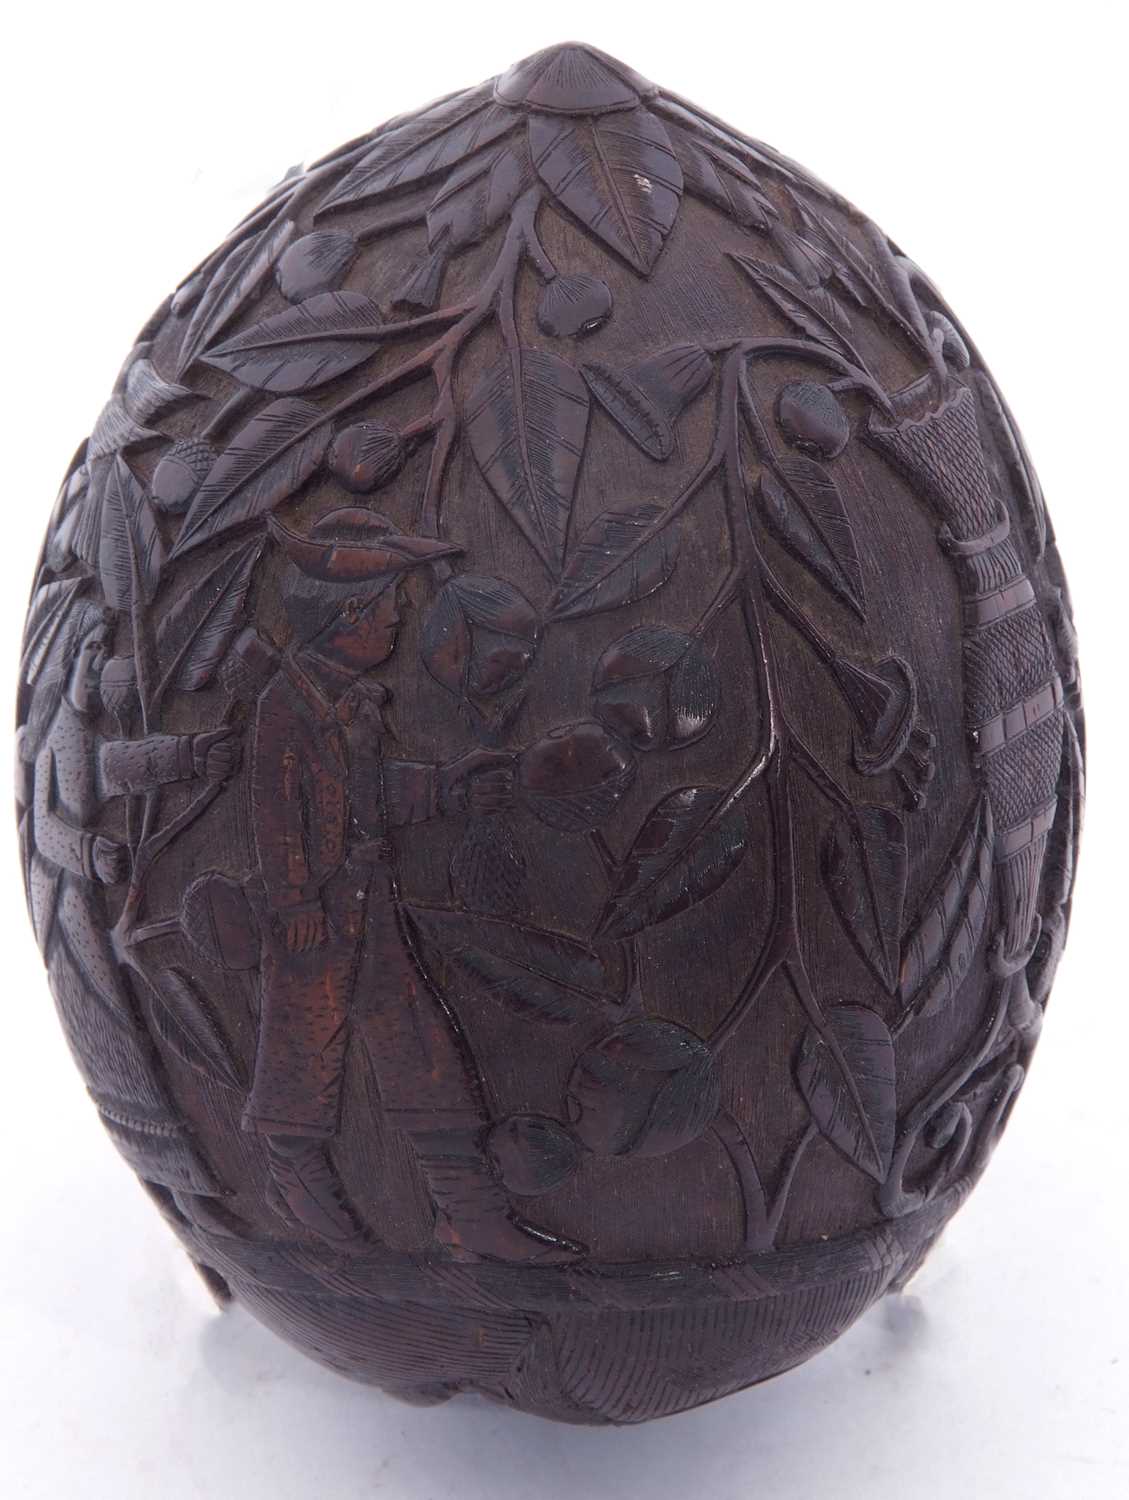 An unusual antique carved coconut bugbear container, the exterior decorated with a scene of - Image 4 of 5